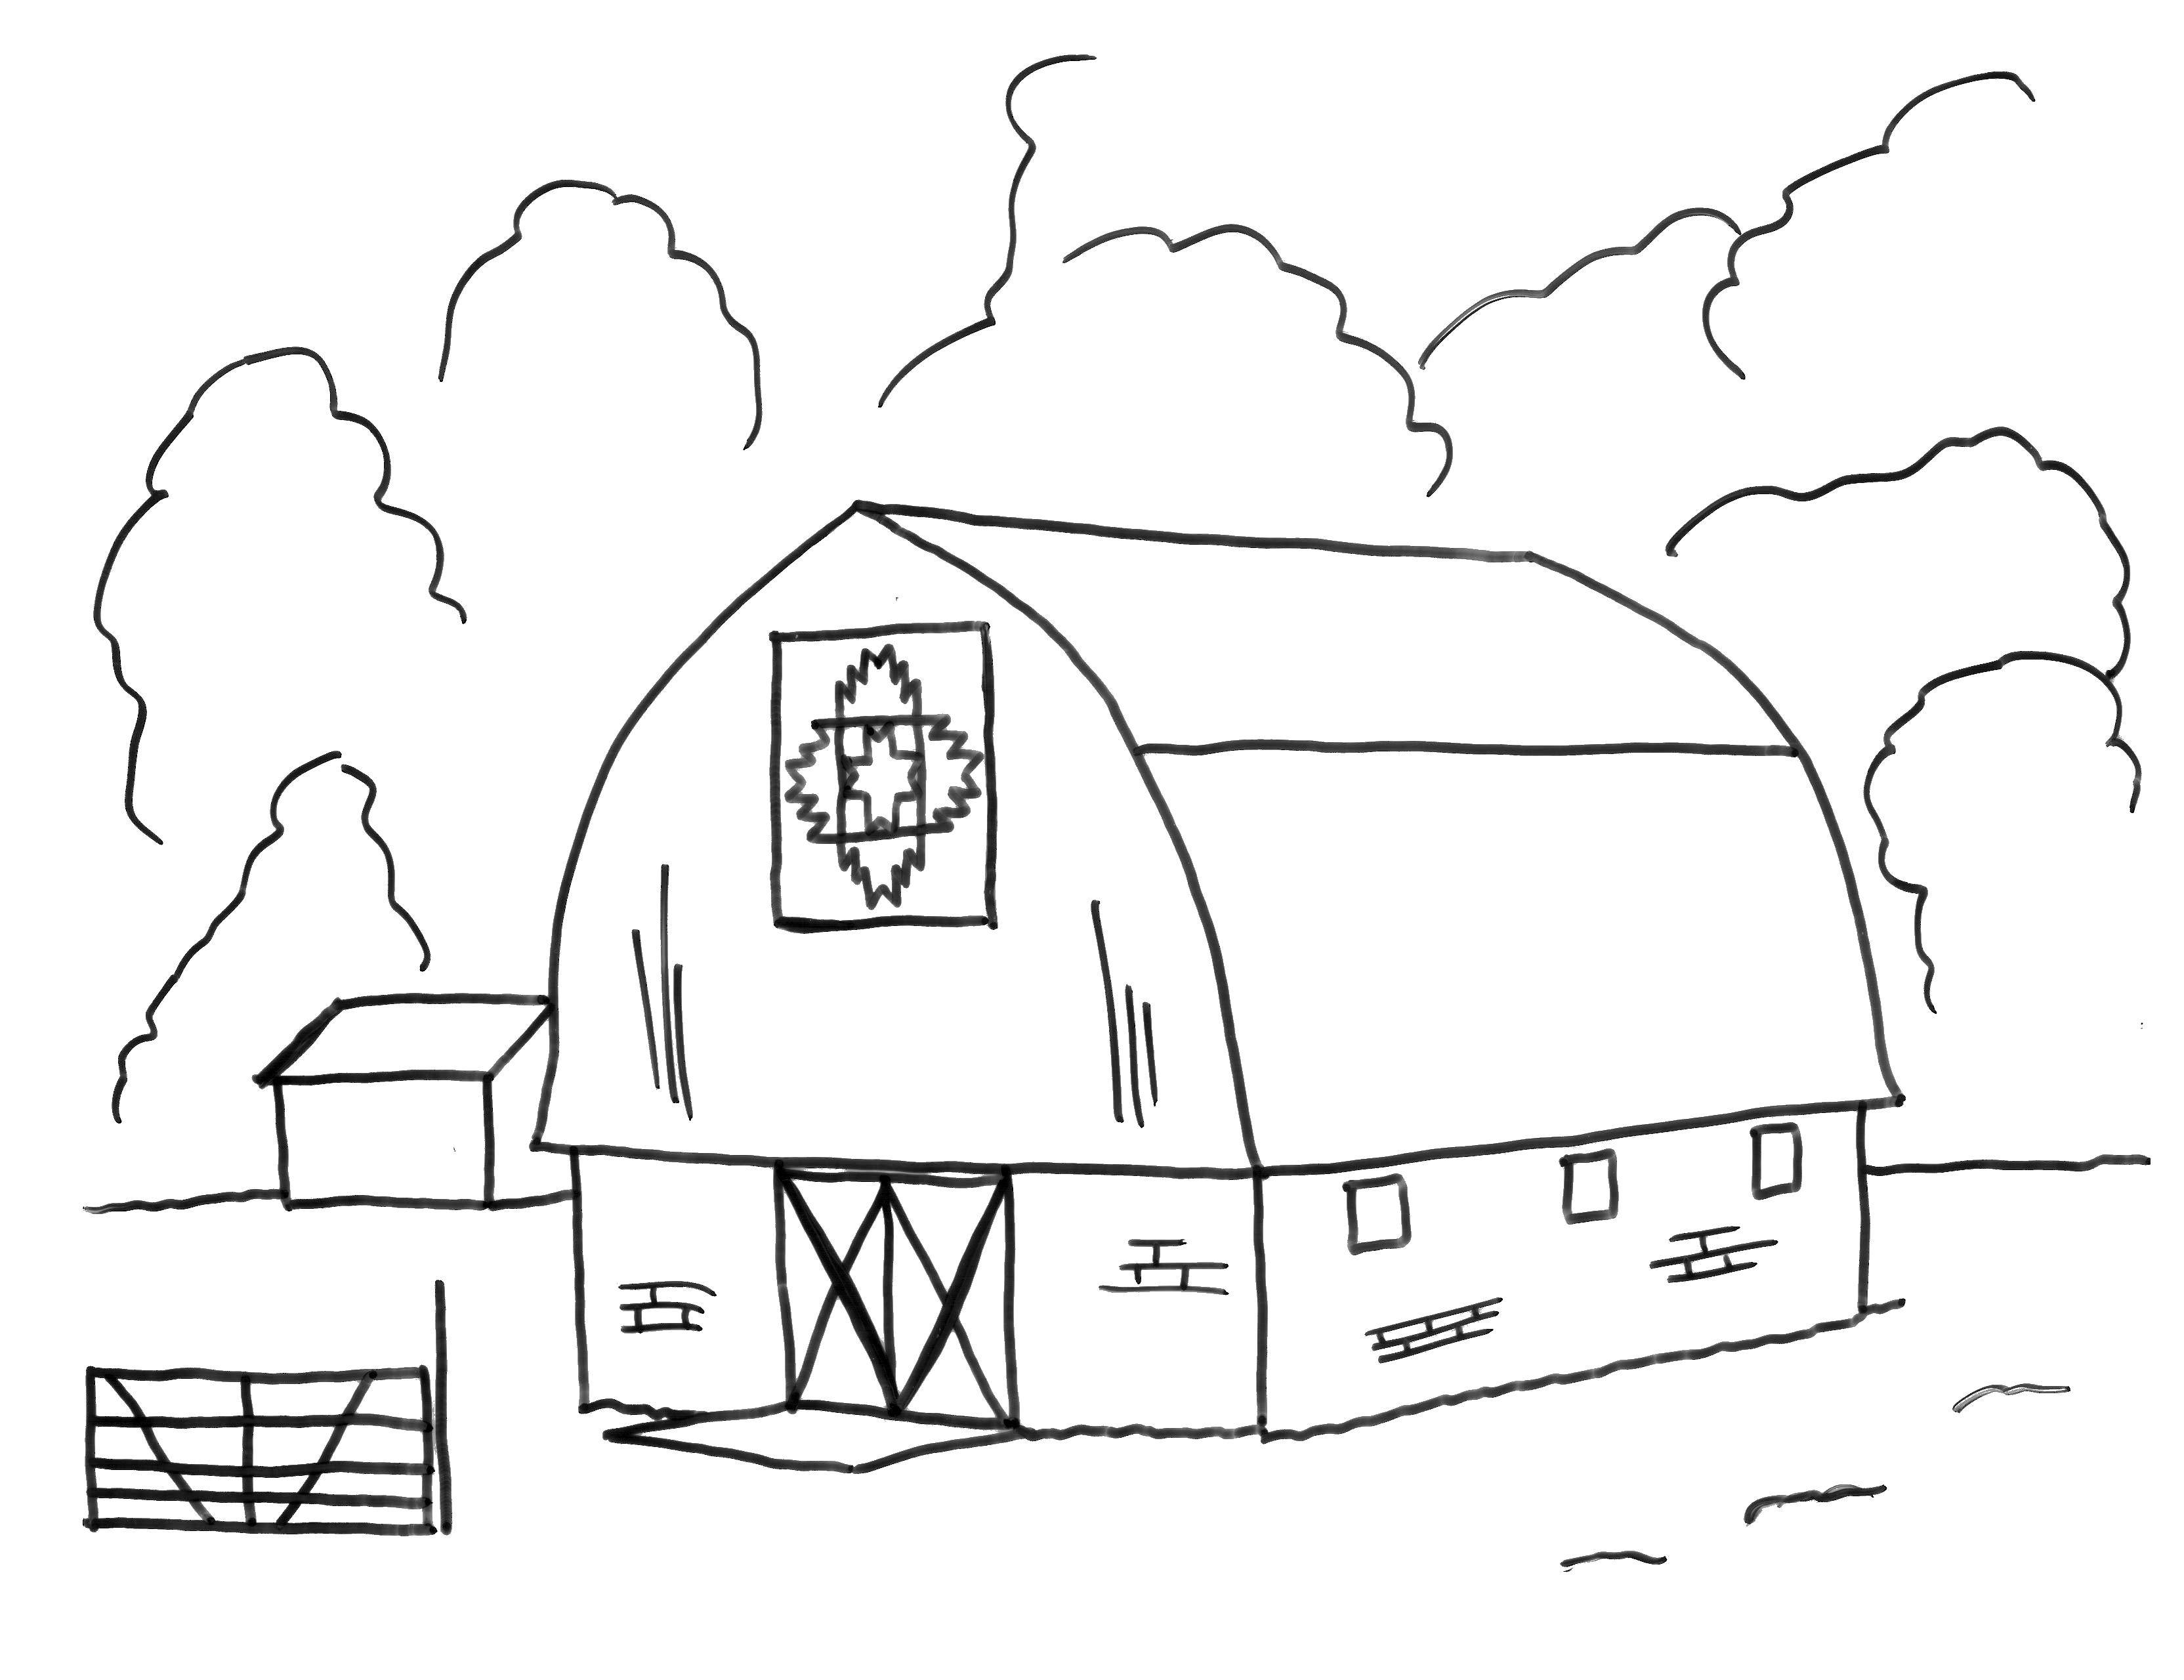 Coloring The barn. Category building. Tags:  buildings, shed, barn.